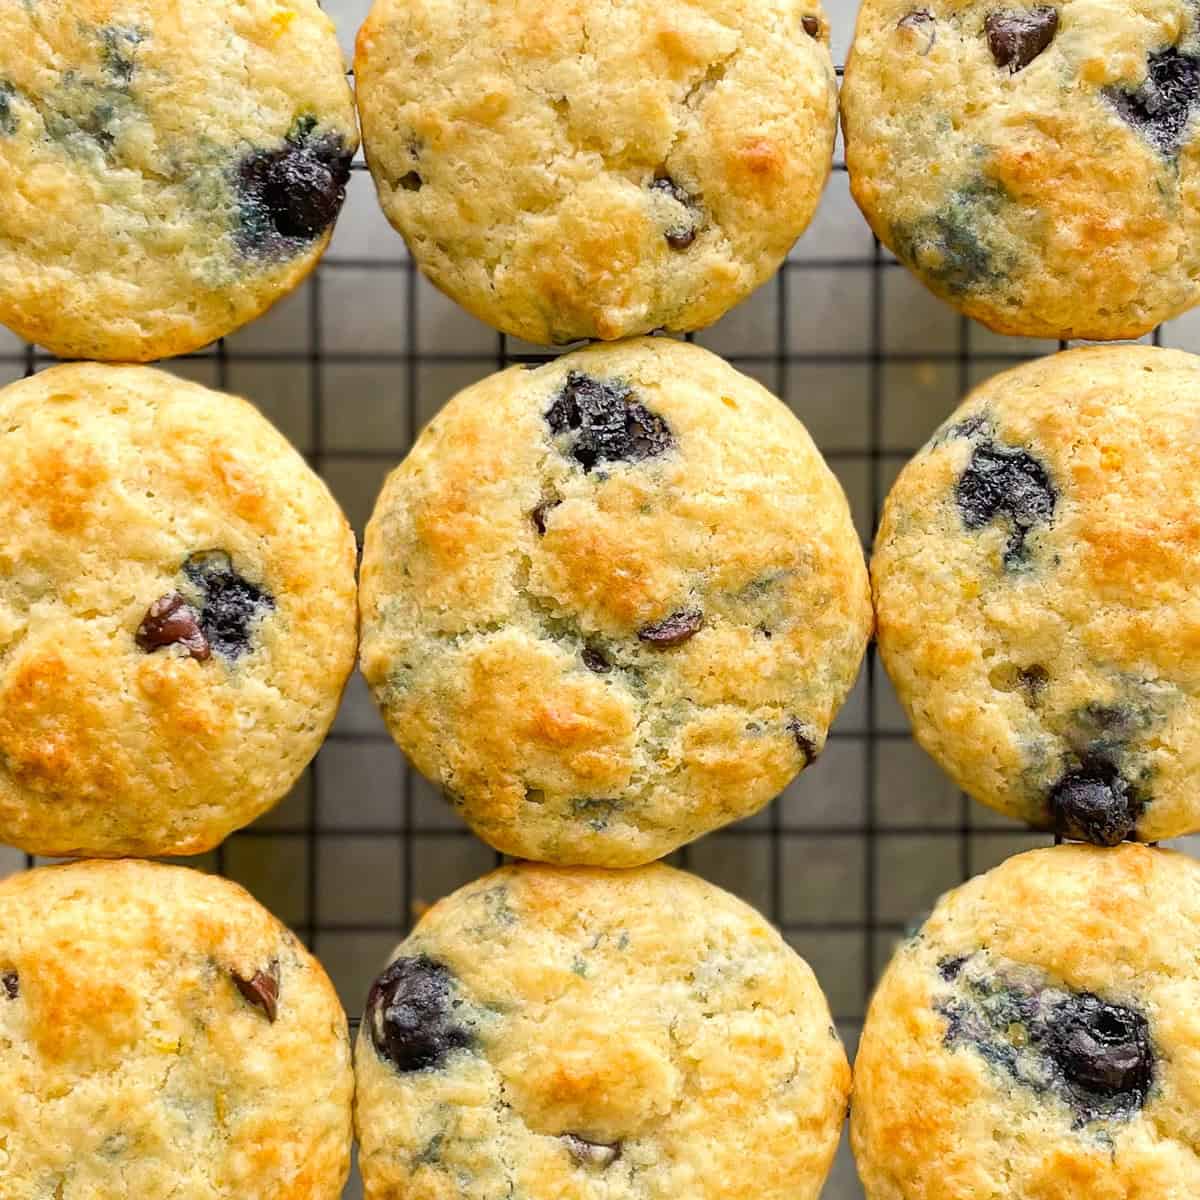 Blueberry Chocolate Chip Muffins